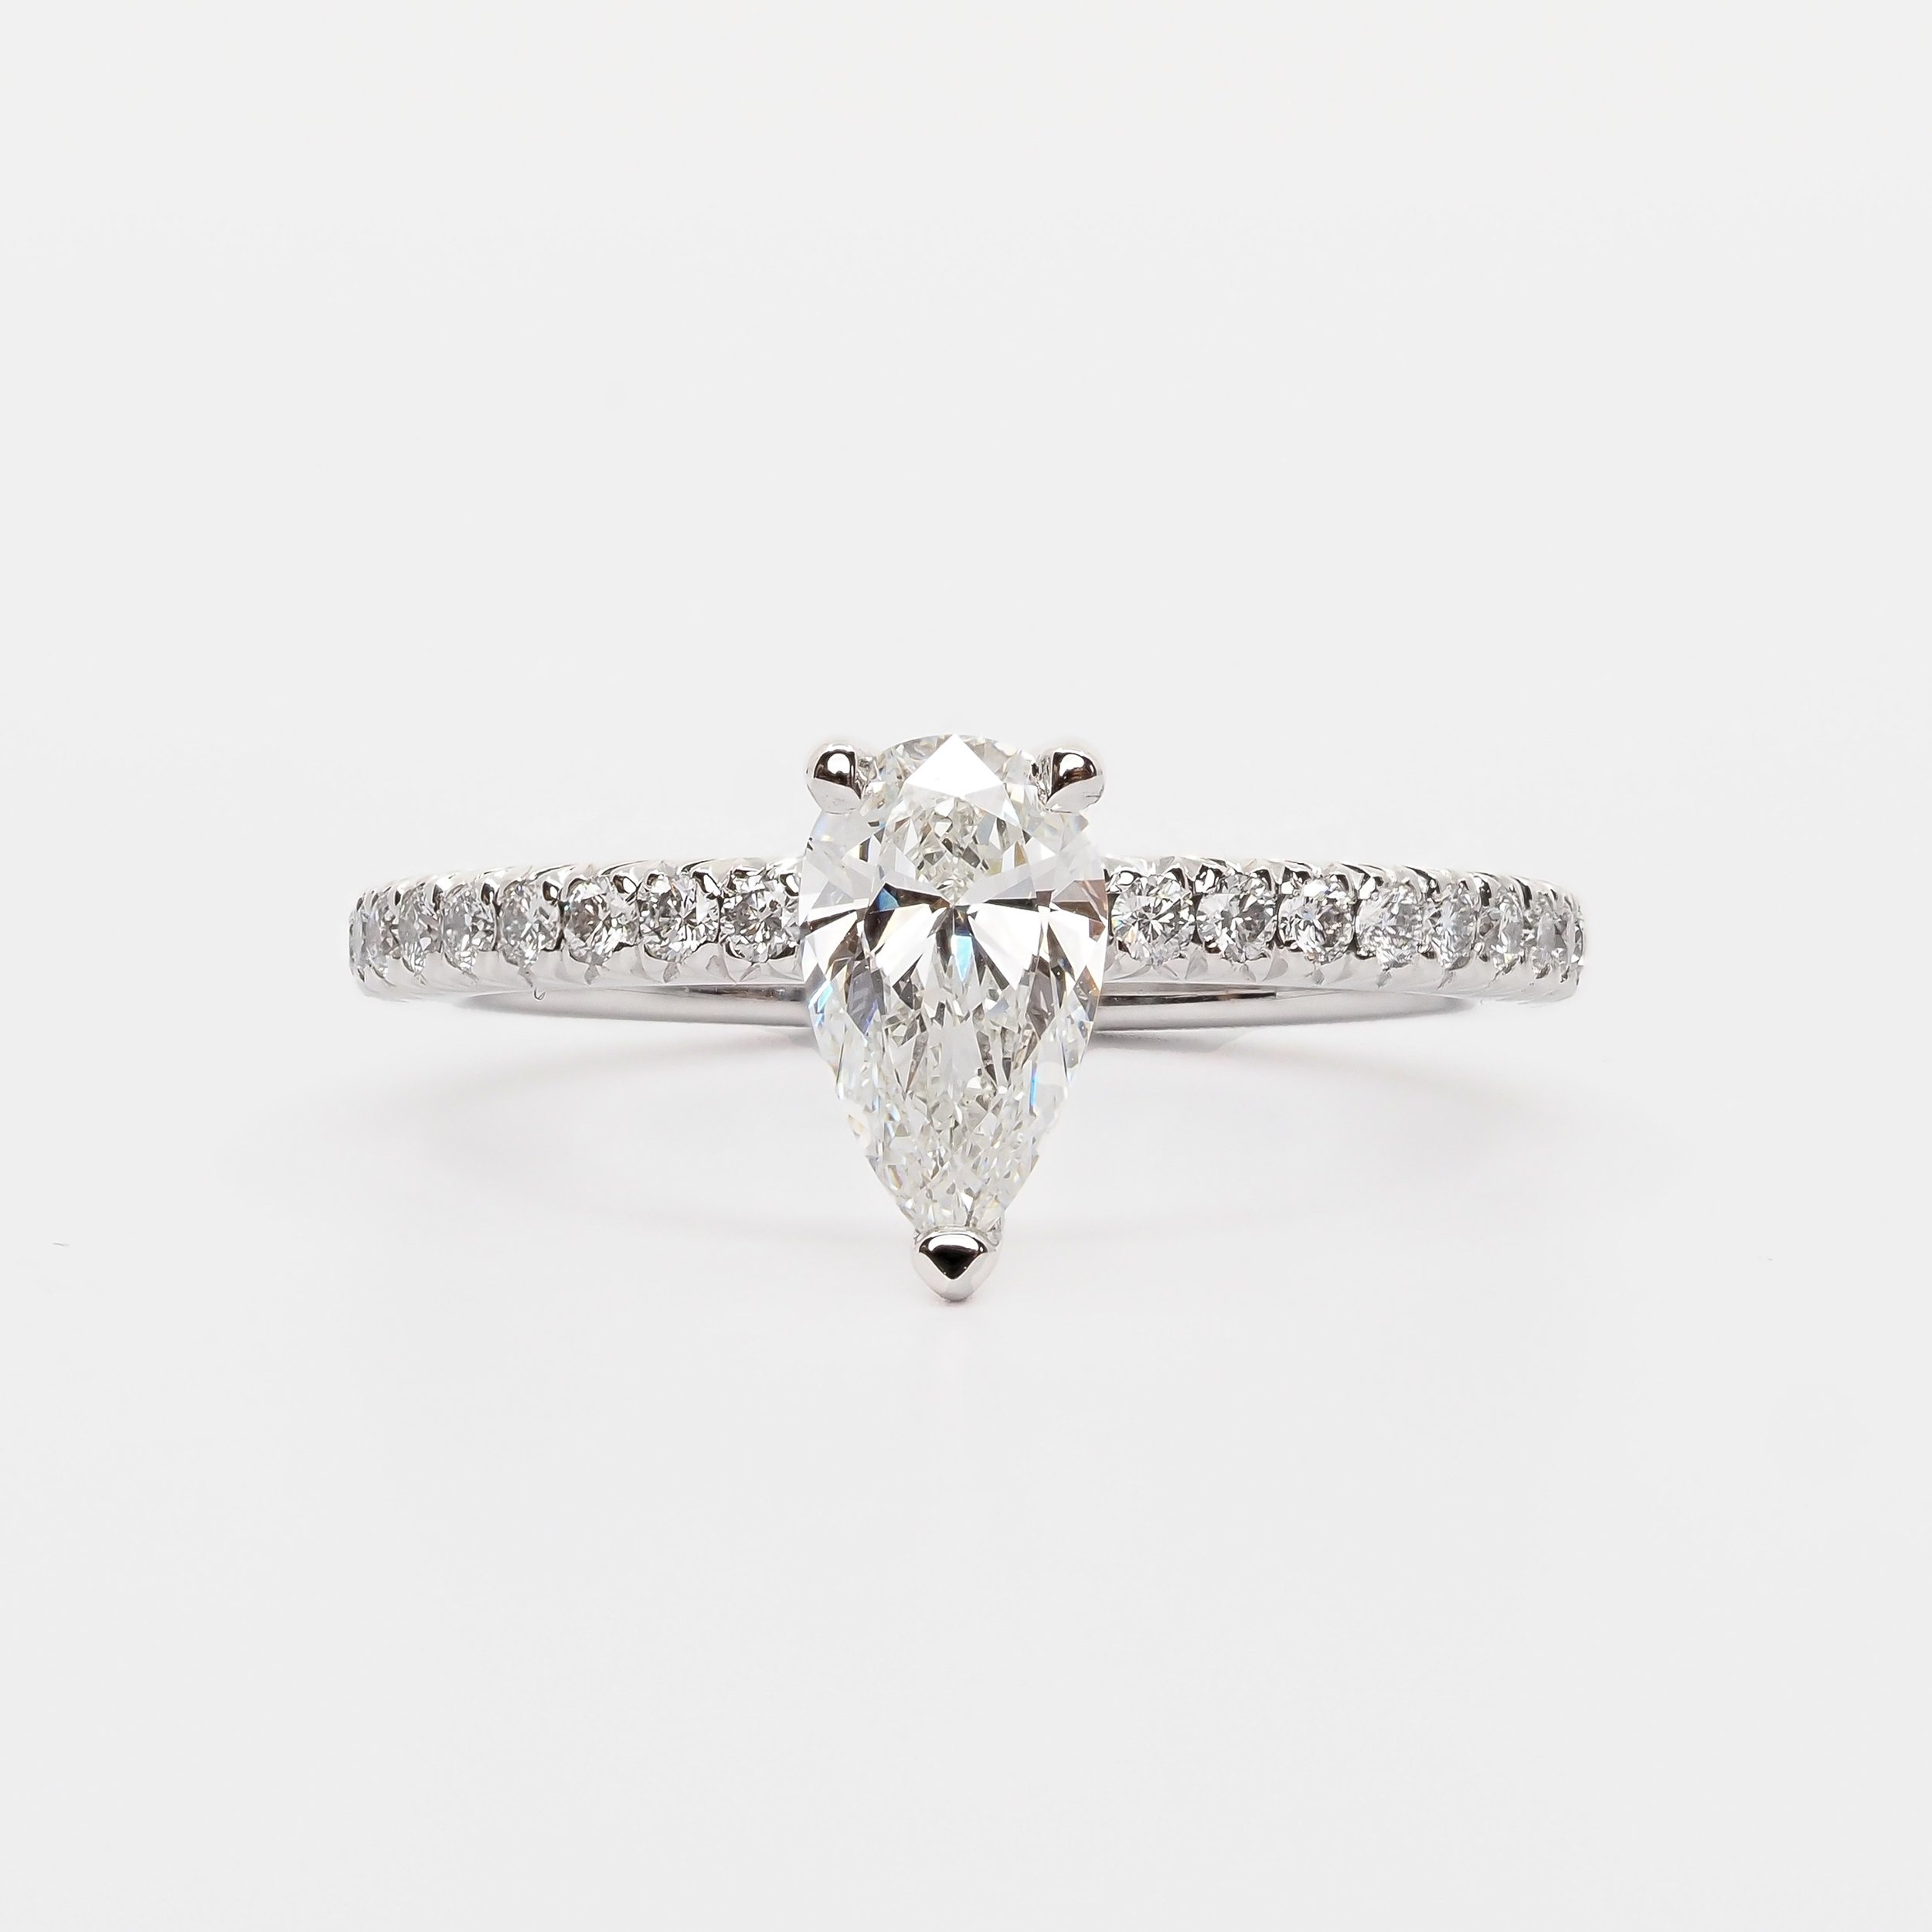 Solitaire ring "Romance"